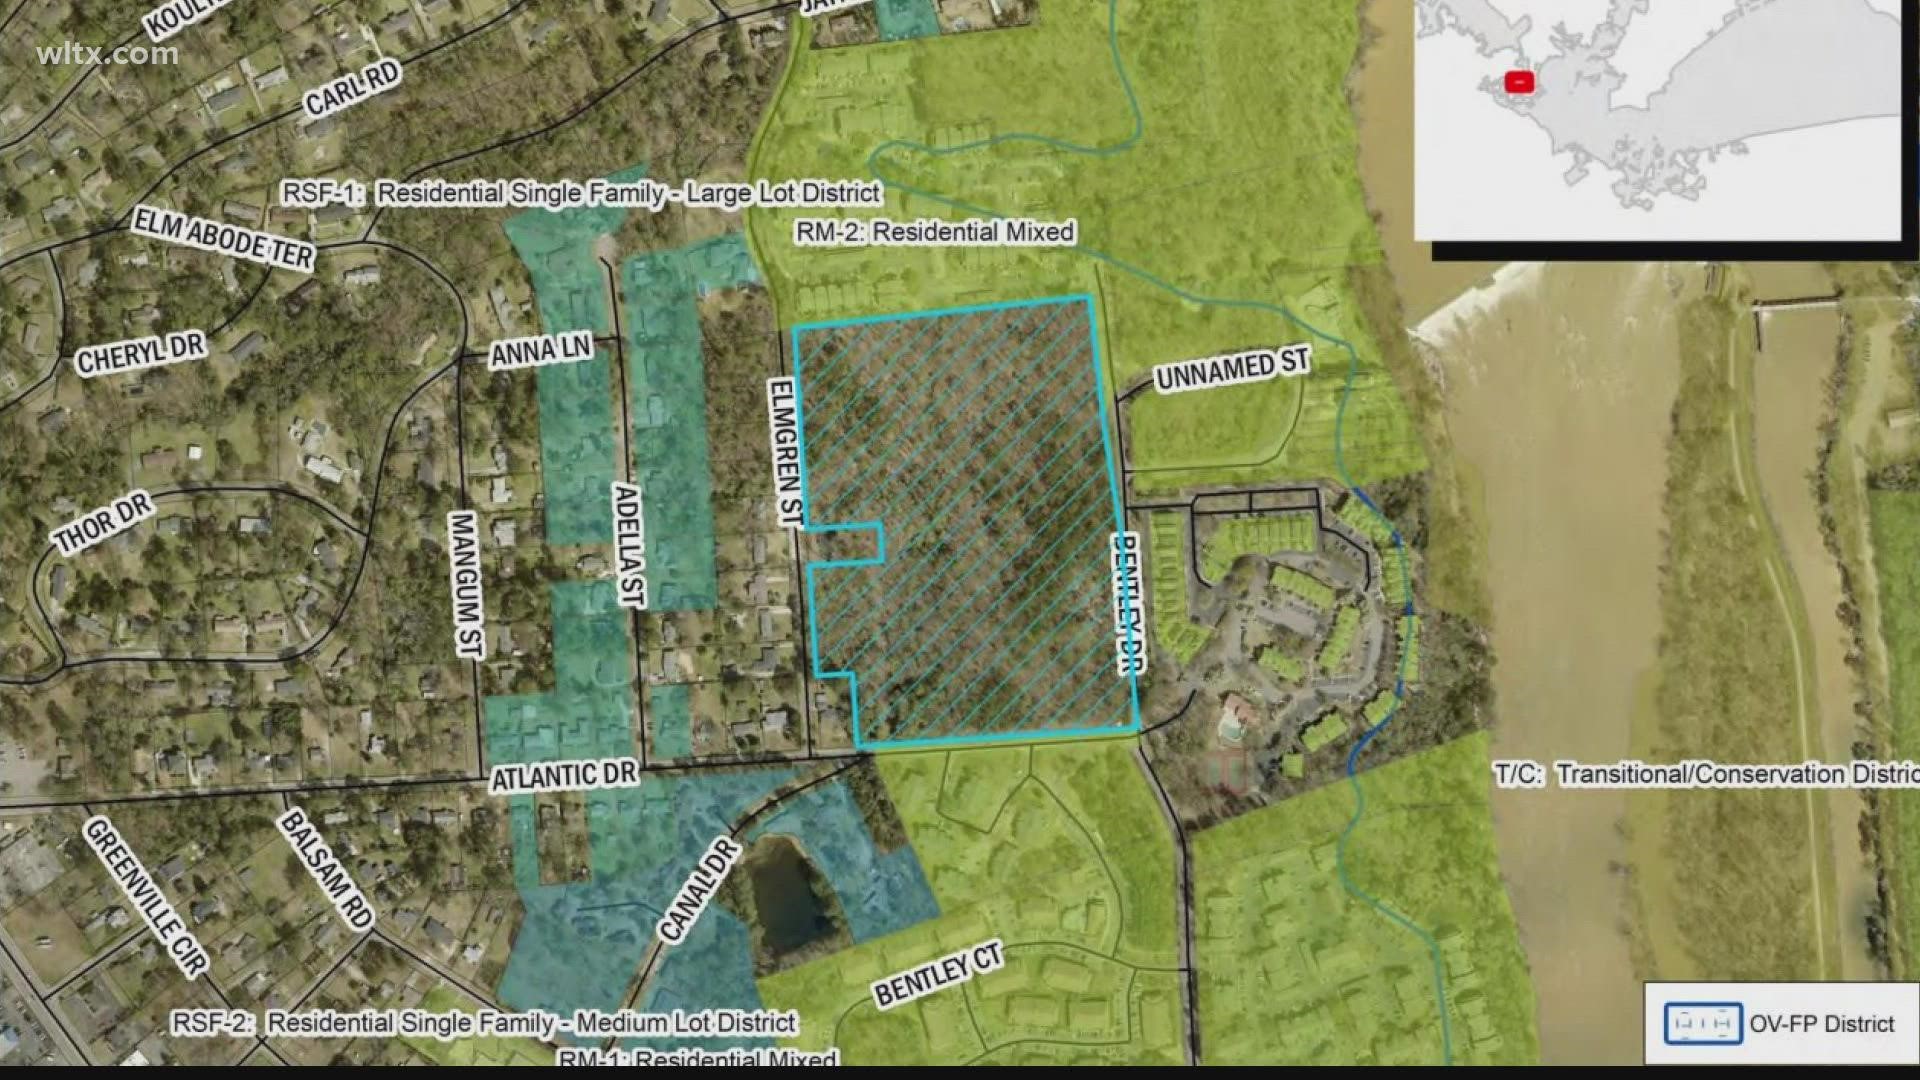 Plans to build new homes on roughly 20 acres of land off Broad River Road raised some concern at a city planning meeting. Other projects were green lighted.